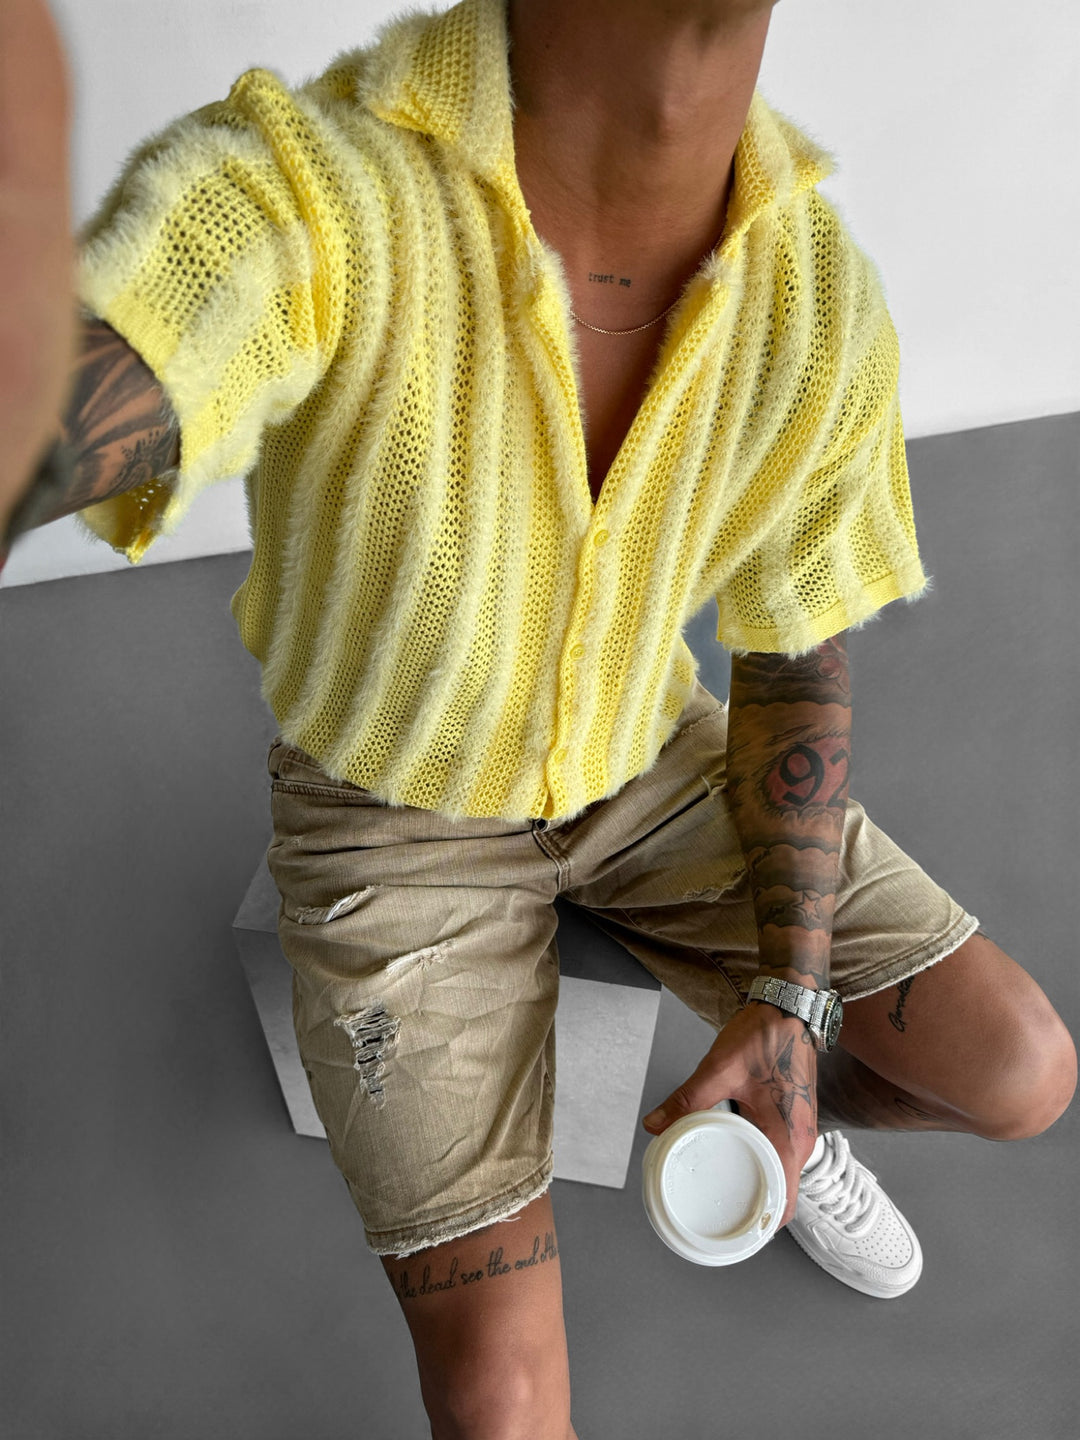 Oversize Hairy Lines Knit Shirt - Yellow